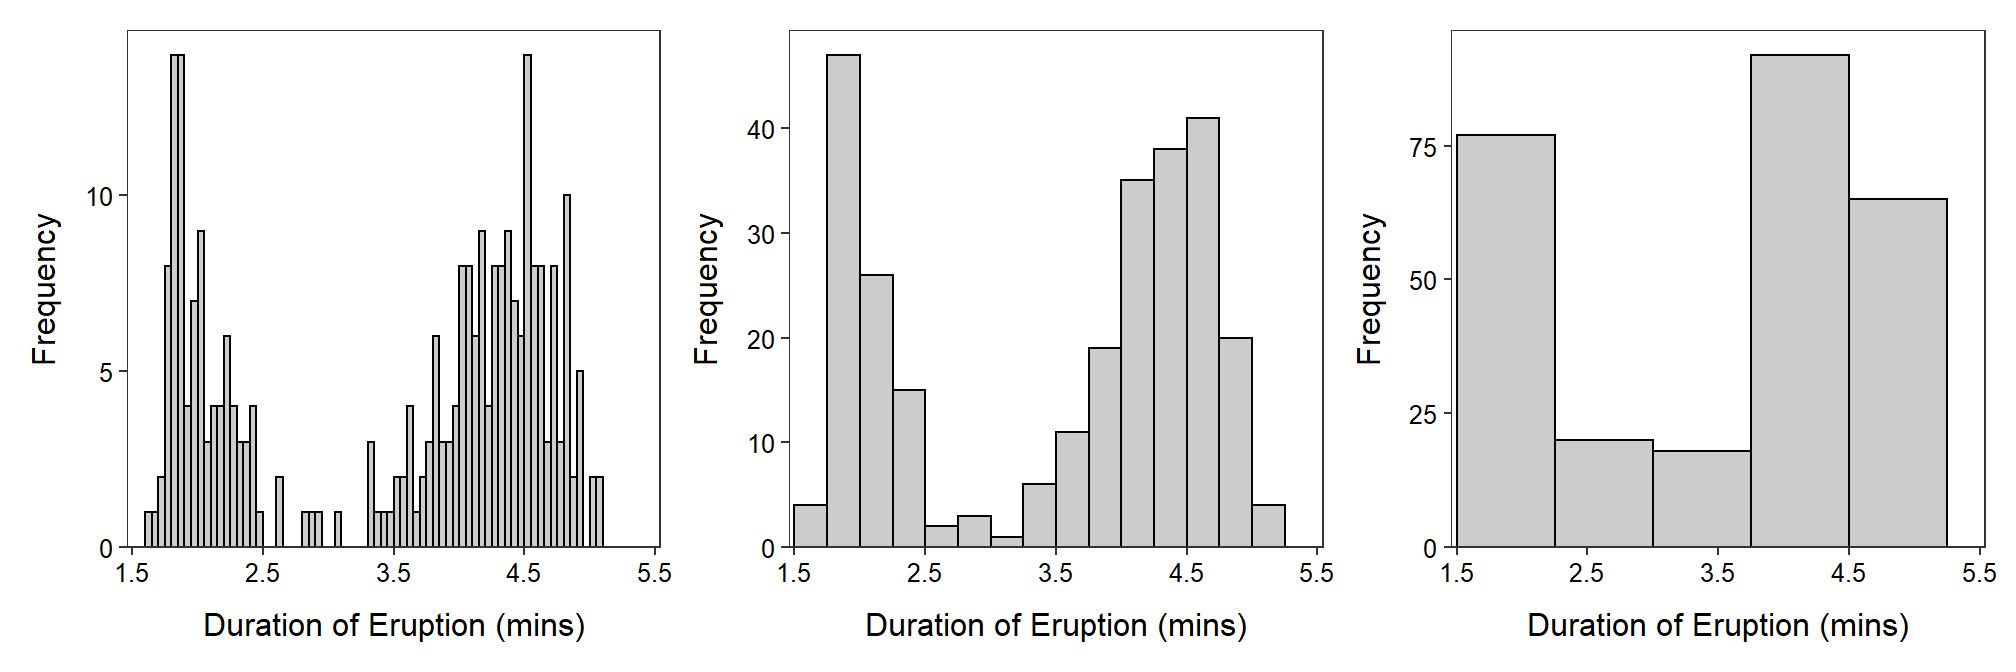 Histogram of length of eruptions for Old Faithful geyser with varying number of bins/classes.